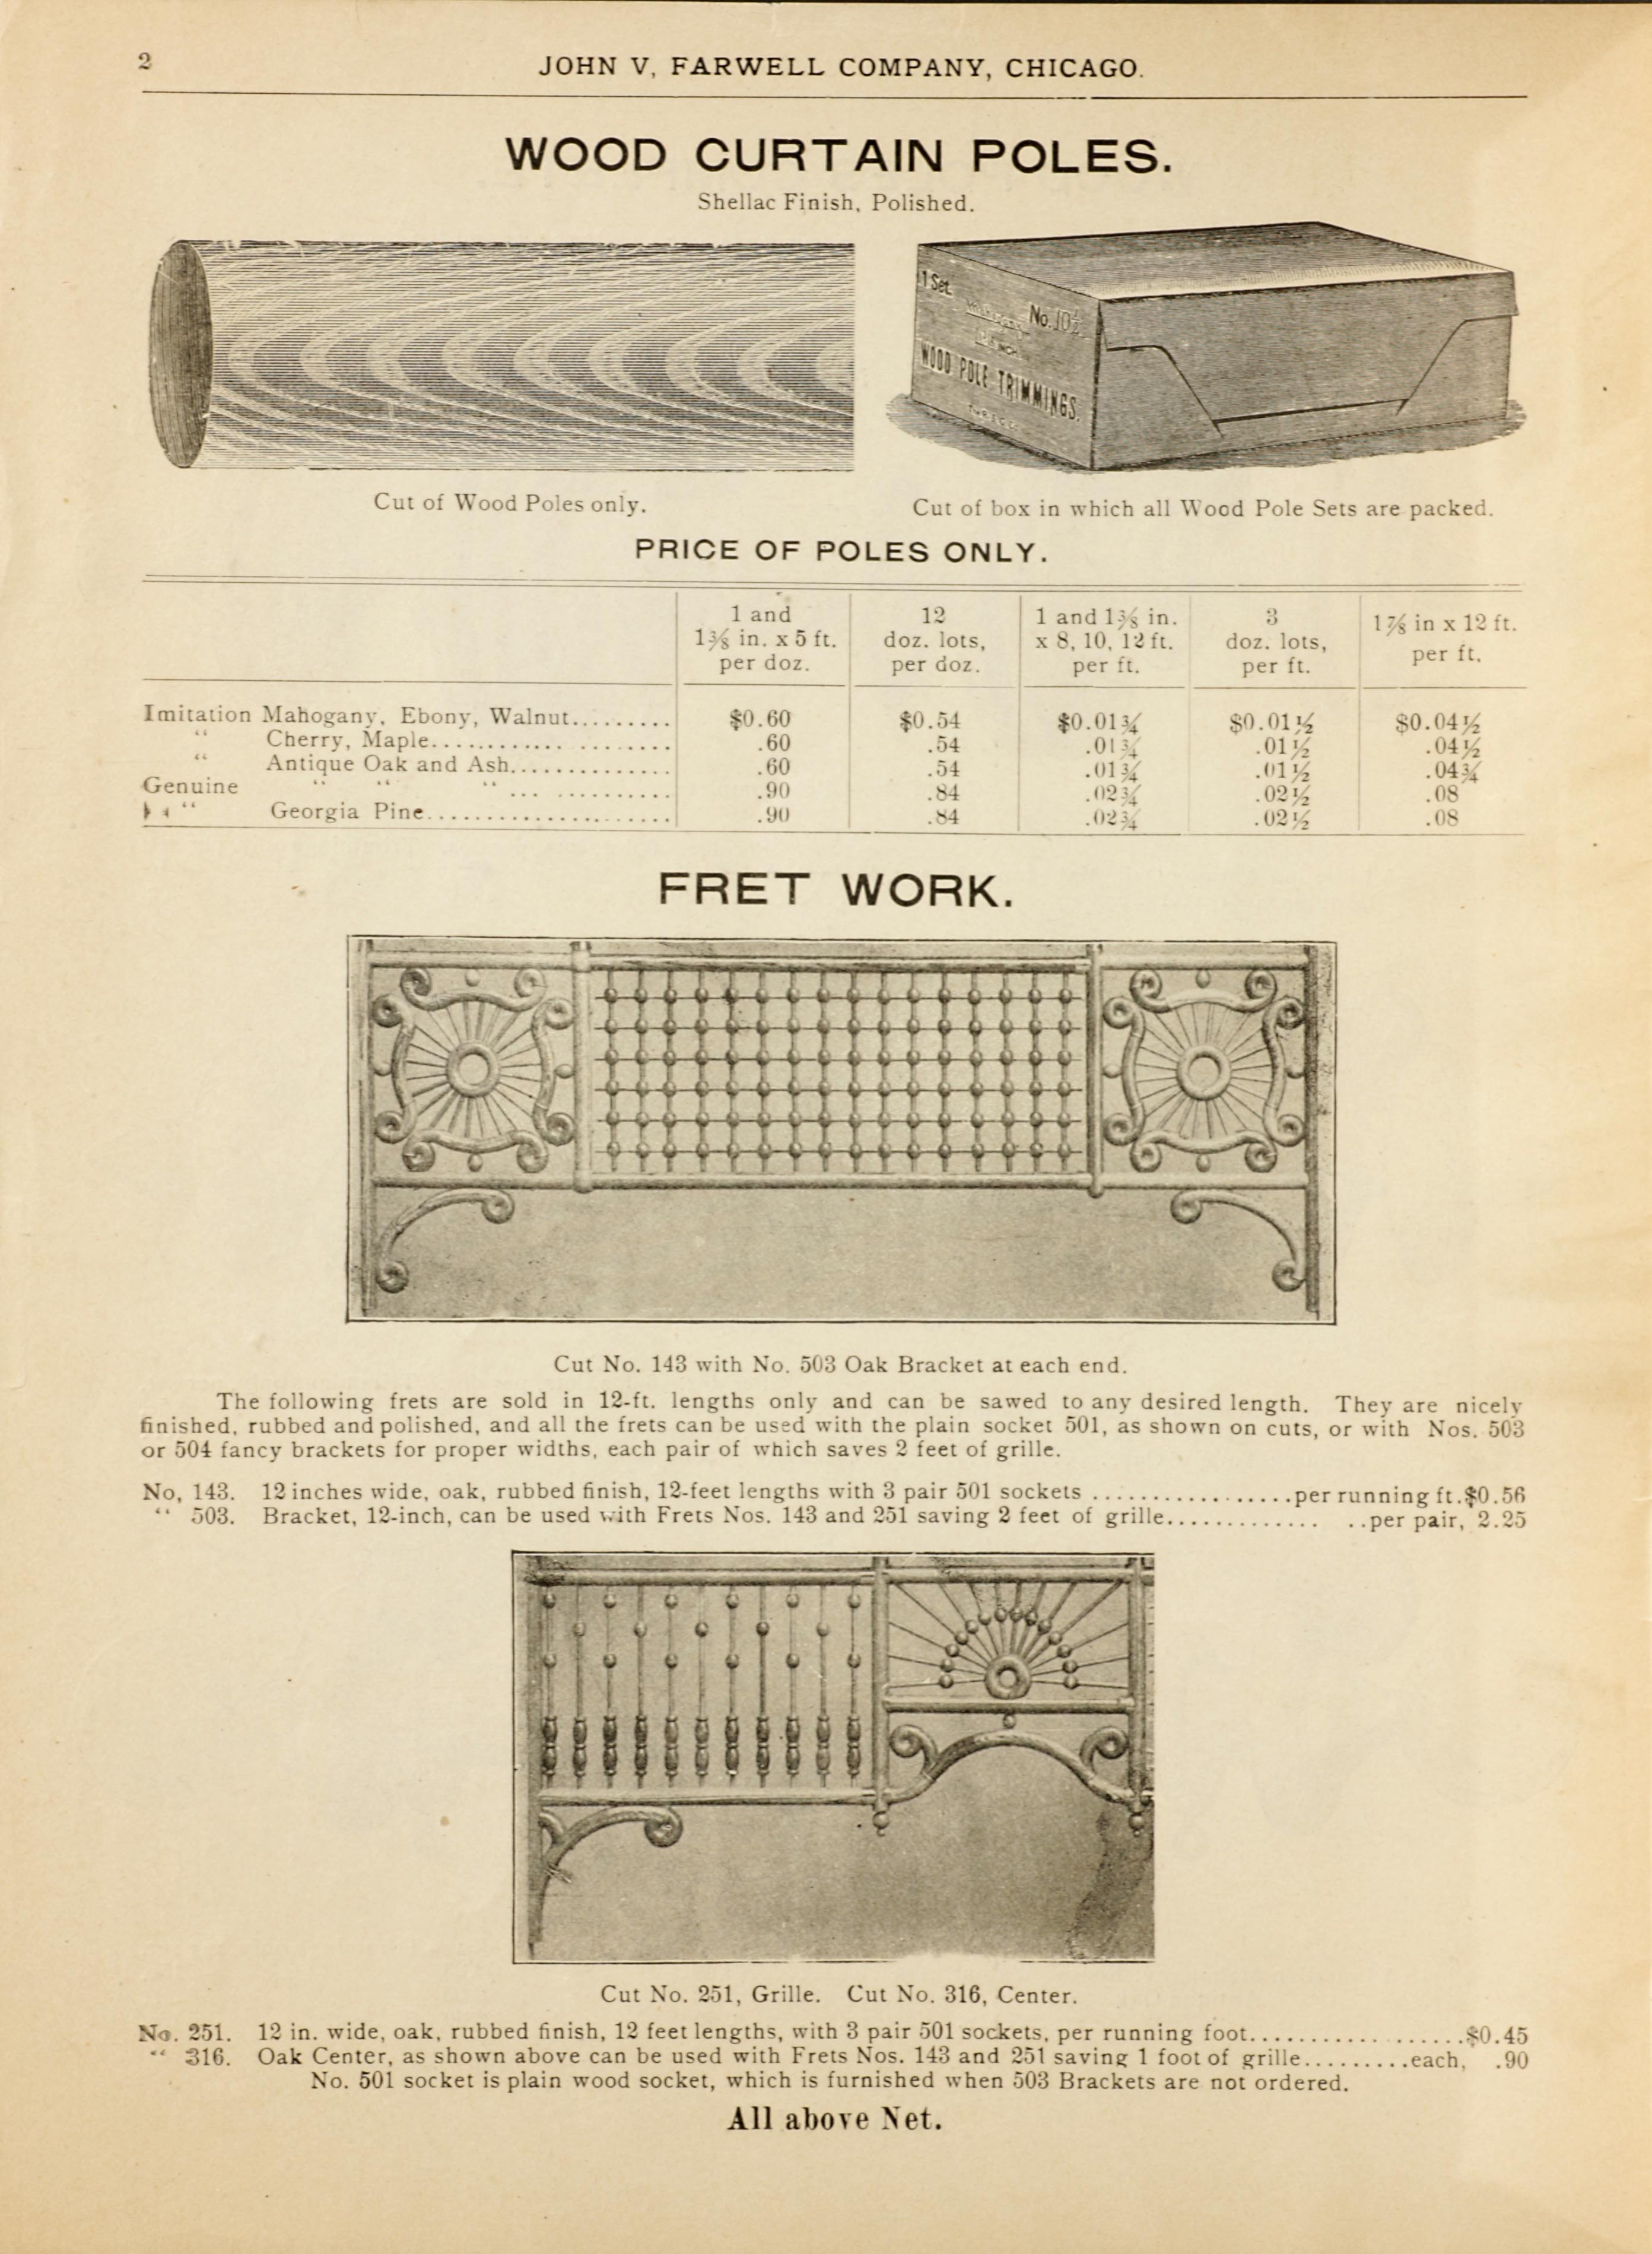 John V. Farwell Iron Bed Catalog, Chicago 1895- Page 3